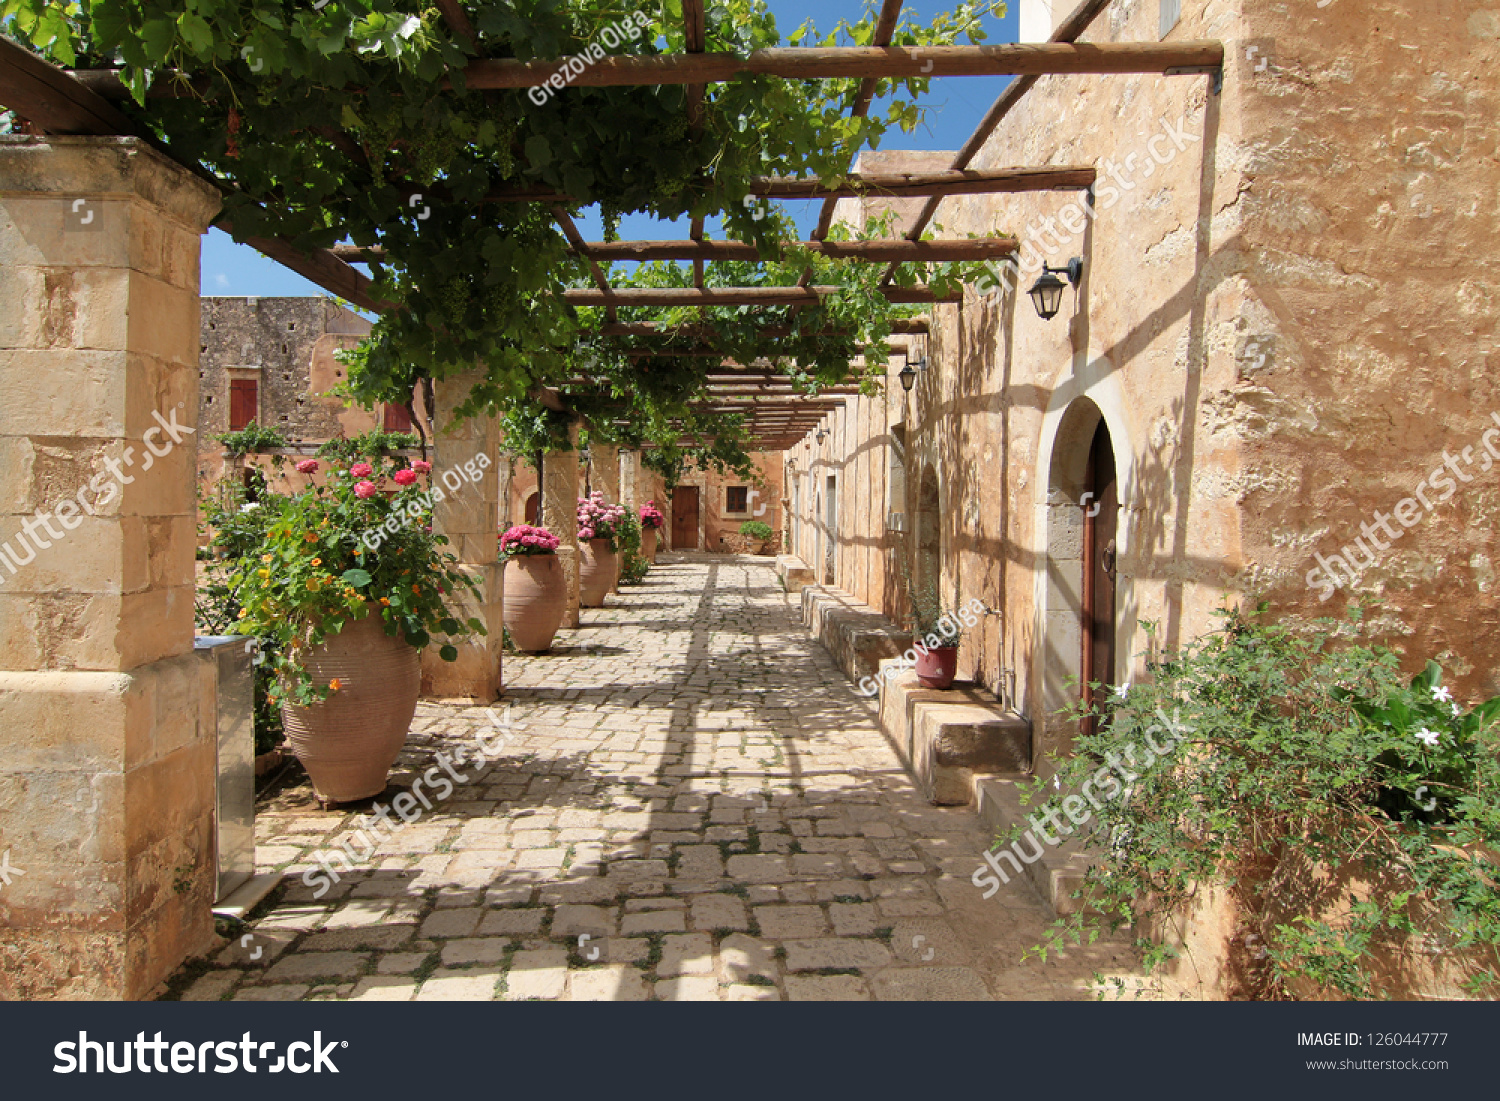 Garden Courtyard With Flowers In Ceramic Pots, Images From Monastery Of